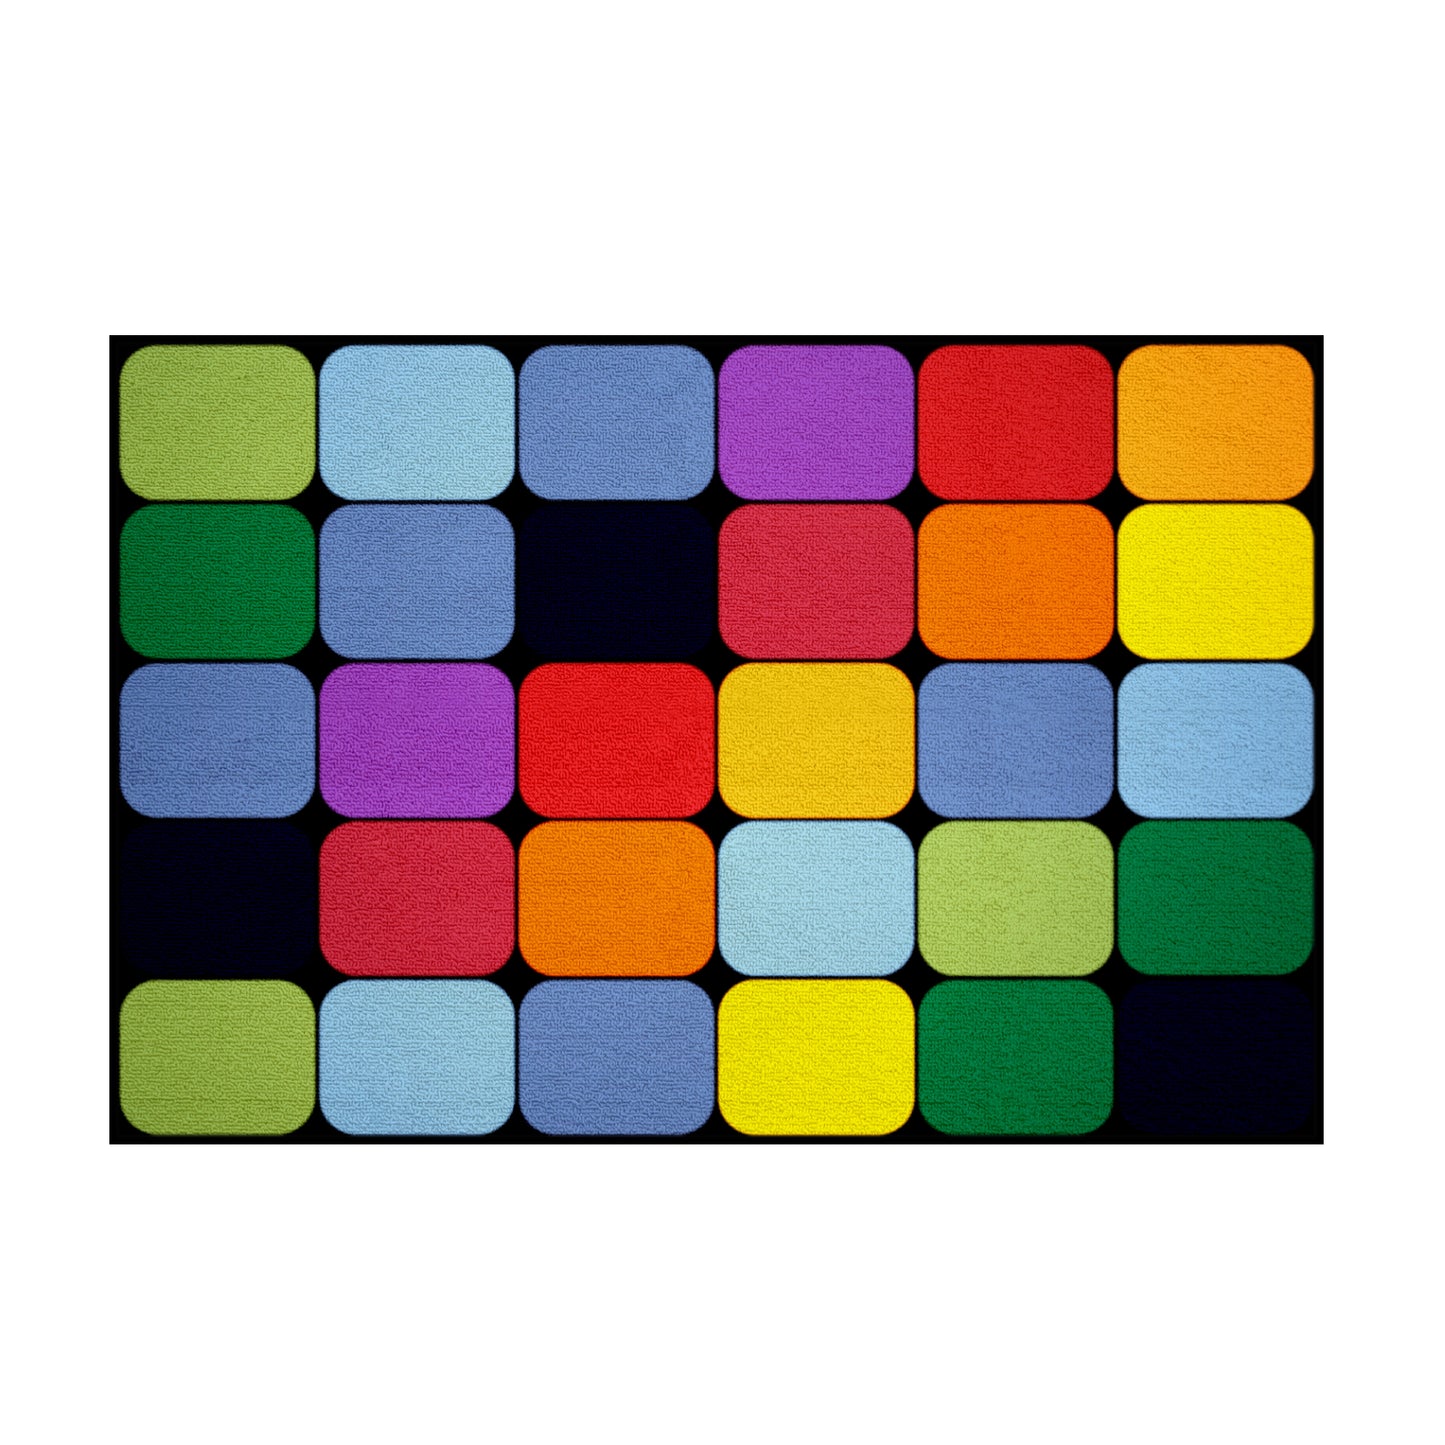 Coloured Rounded Square Placement 30 Grid Rug (2m x 3m)